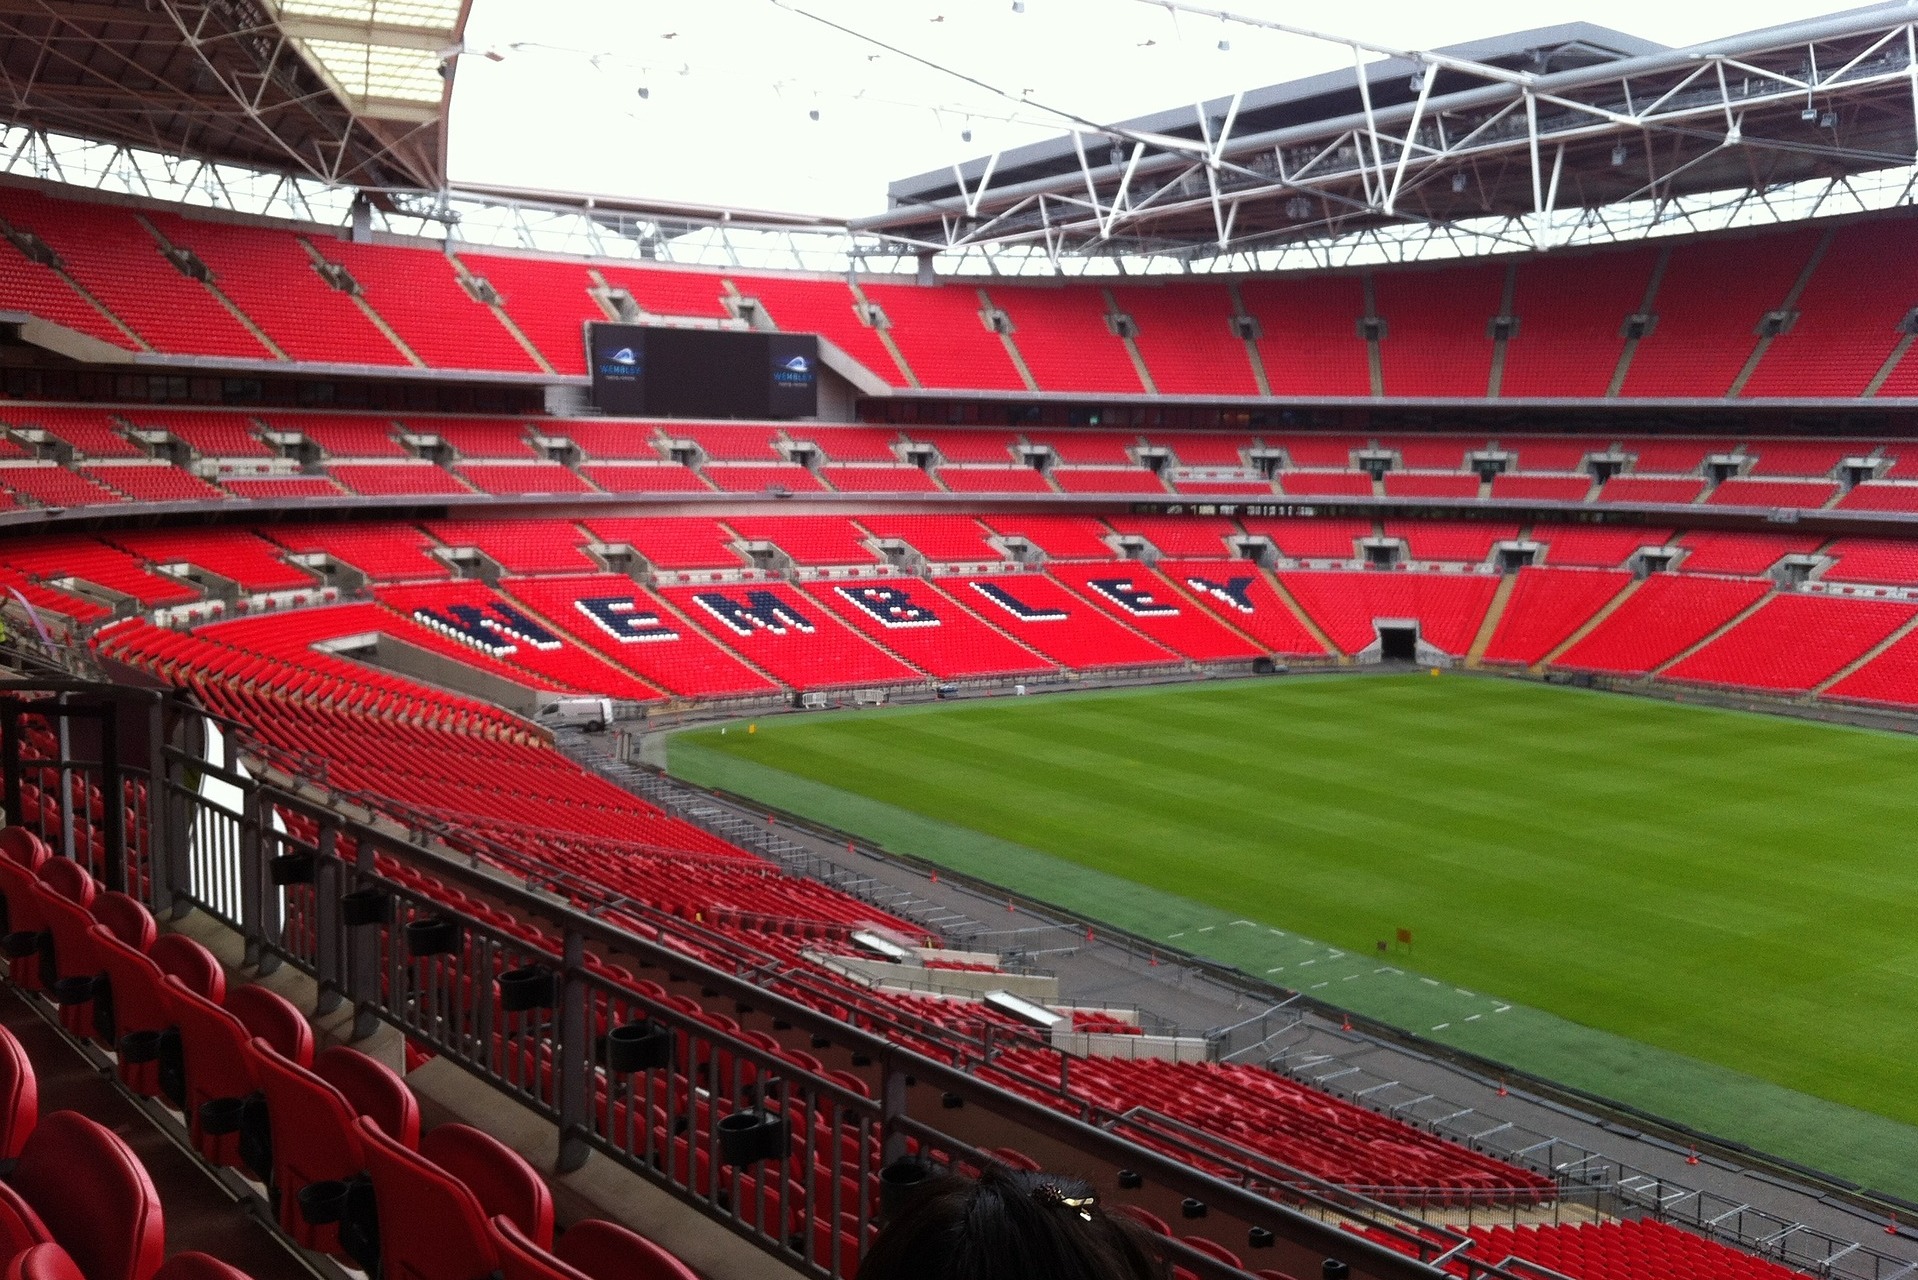 Wembley events boosted local economy by £150m